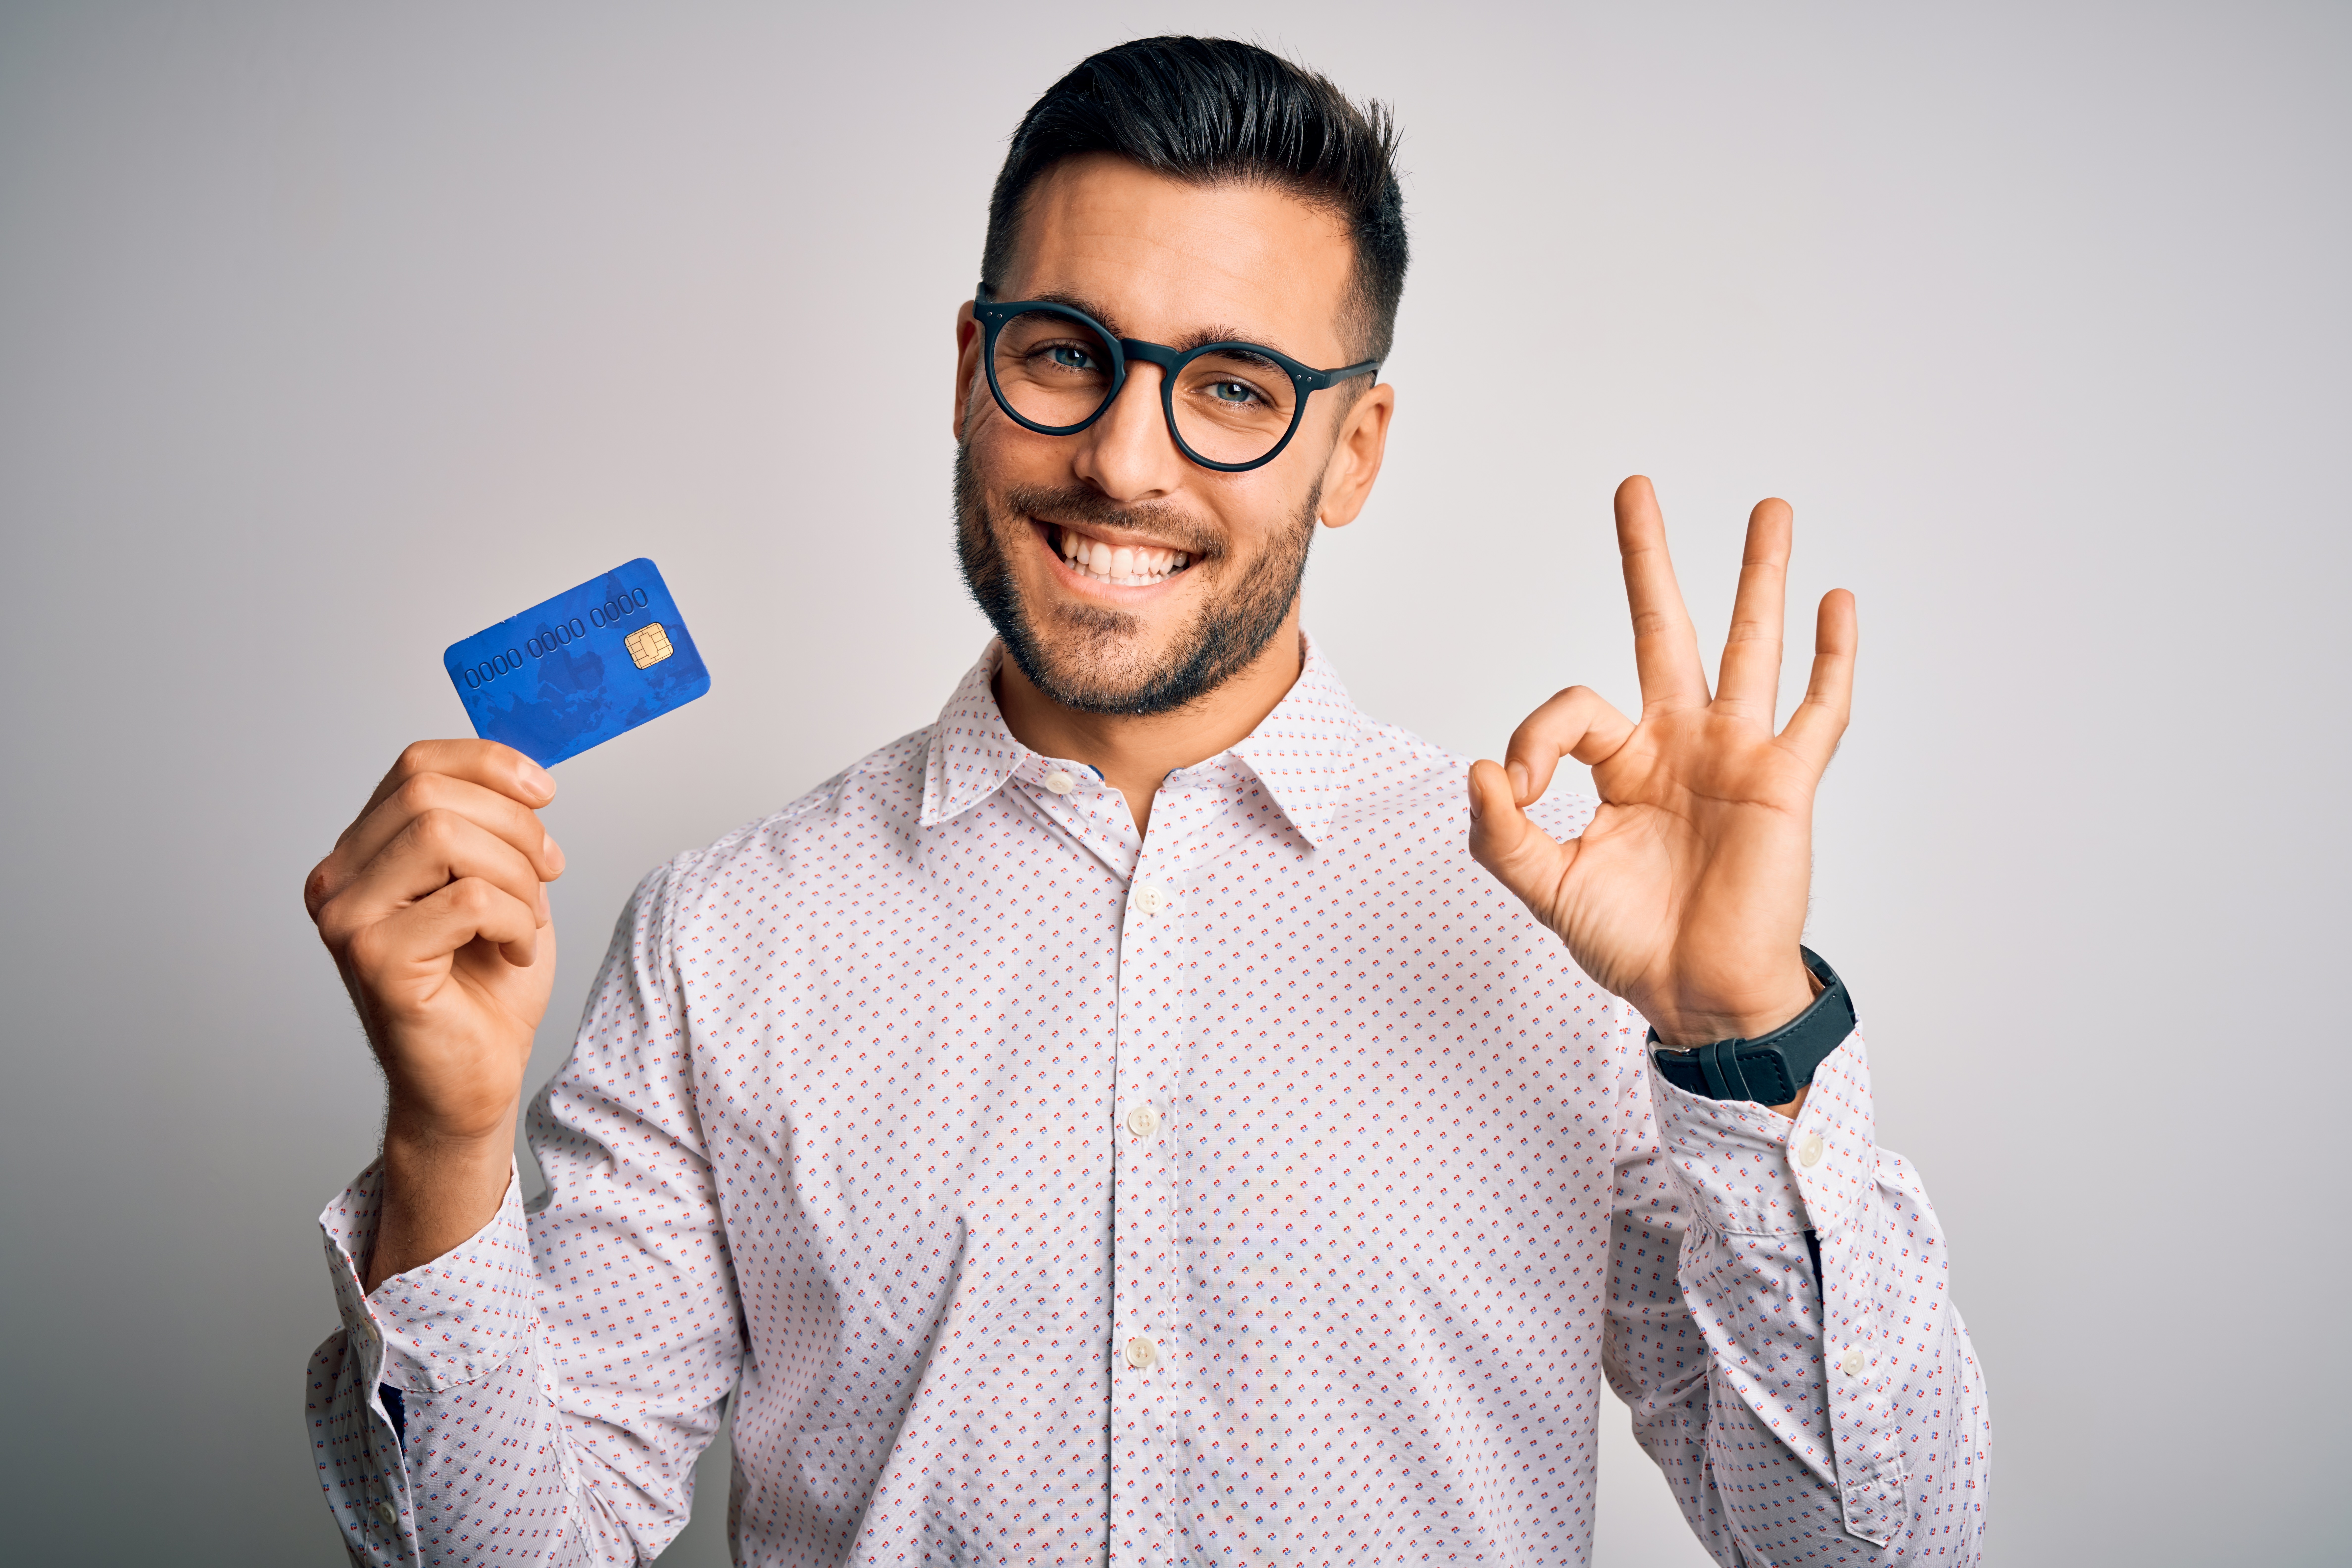 Choose the right credit card to help you grow your business. Source: Adobe Stock.